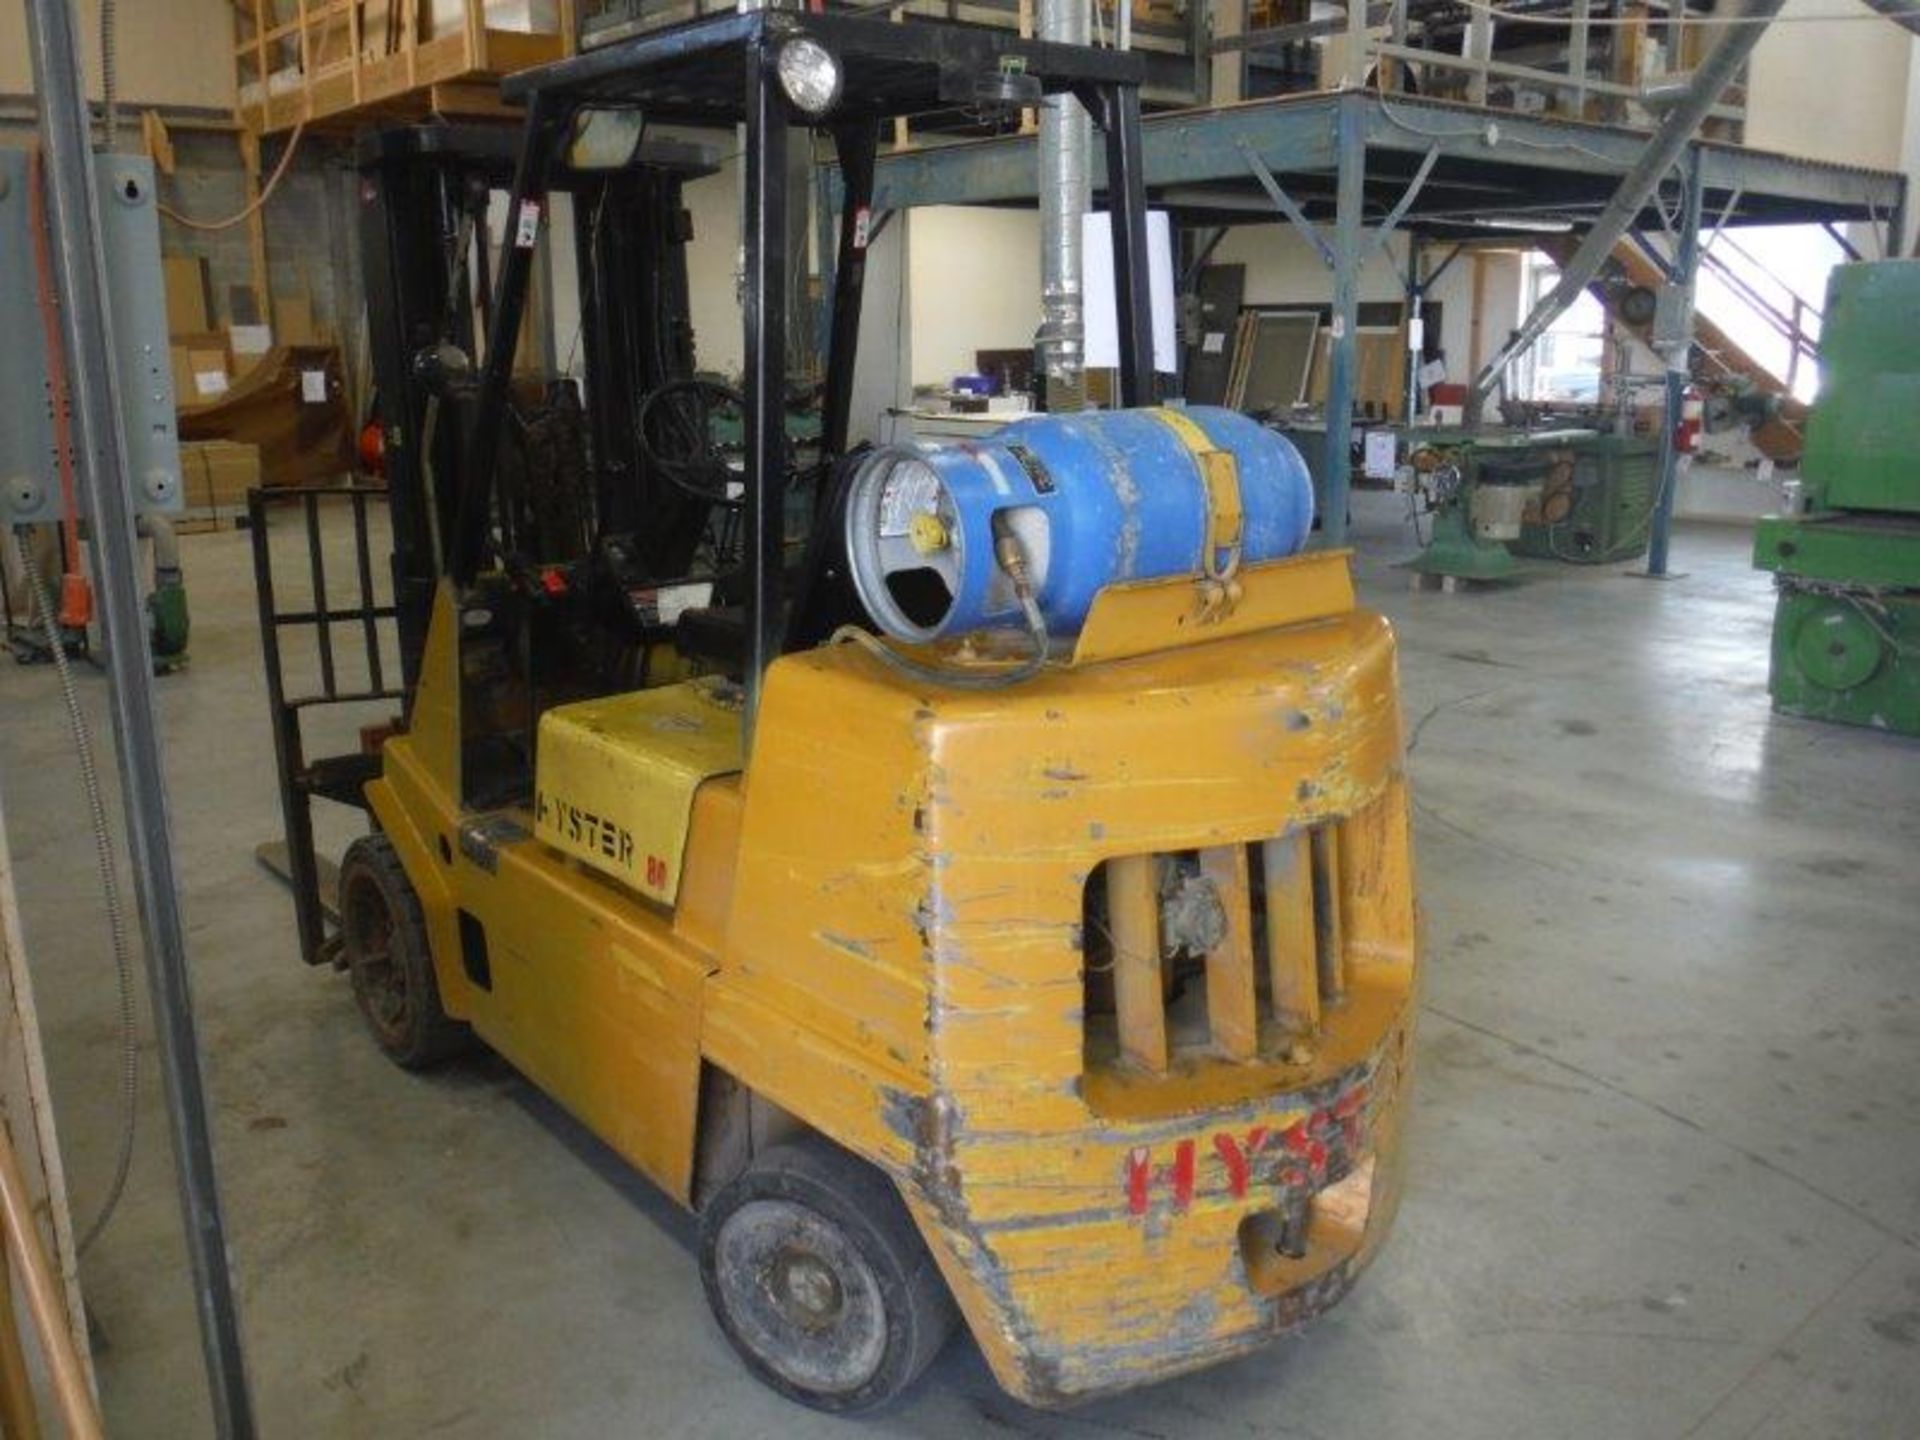 HYSTER PROPANE LIFT TRUCK, 8,000 LBS CAP. SIDE-SHIFT, HARD TIRES, 172'' HEIGHT, C/W EXTENSION FORKS - Image 3 of 9